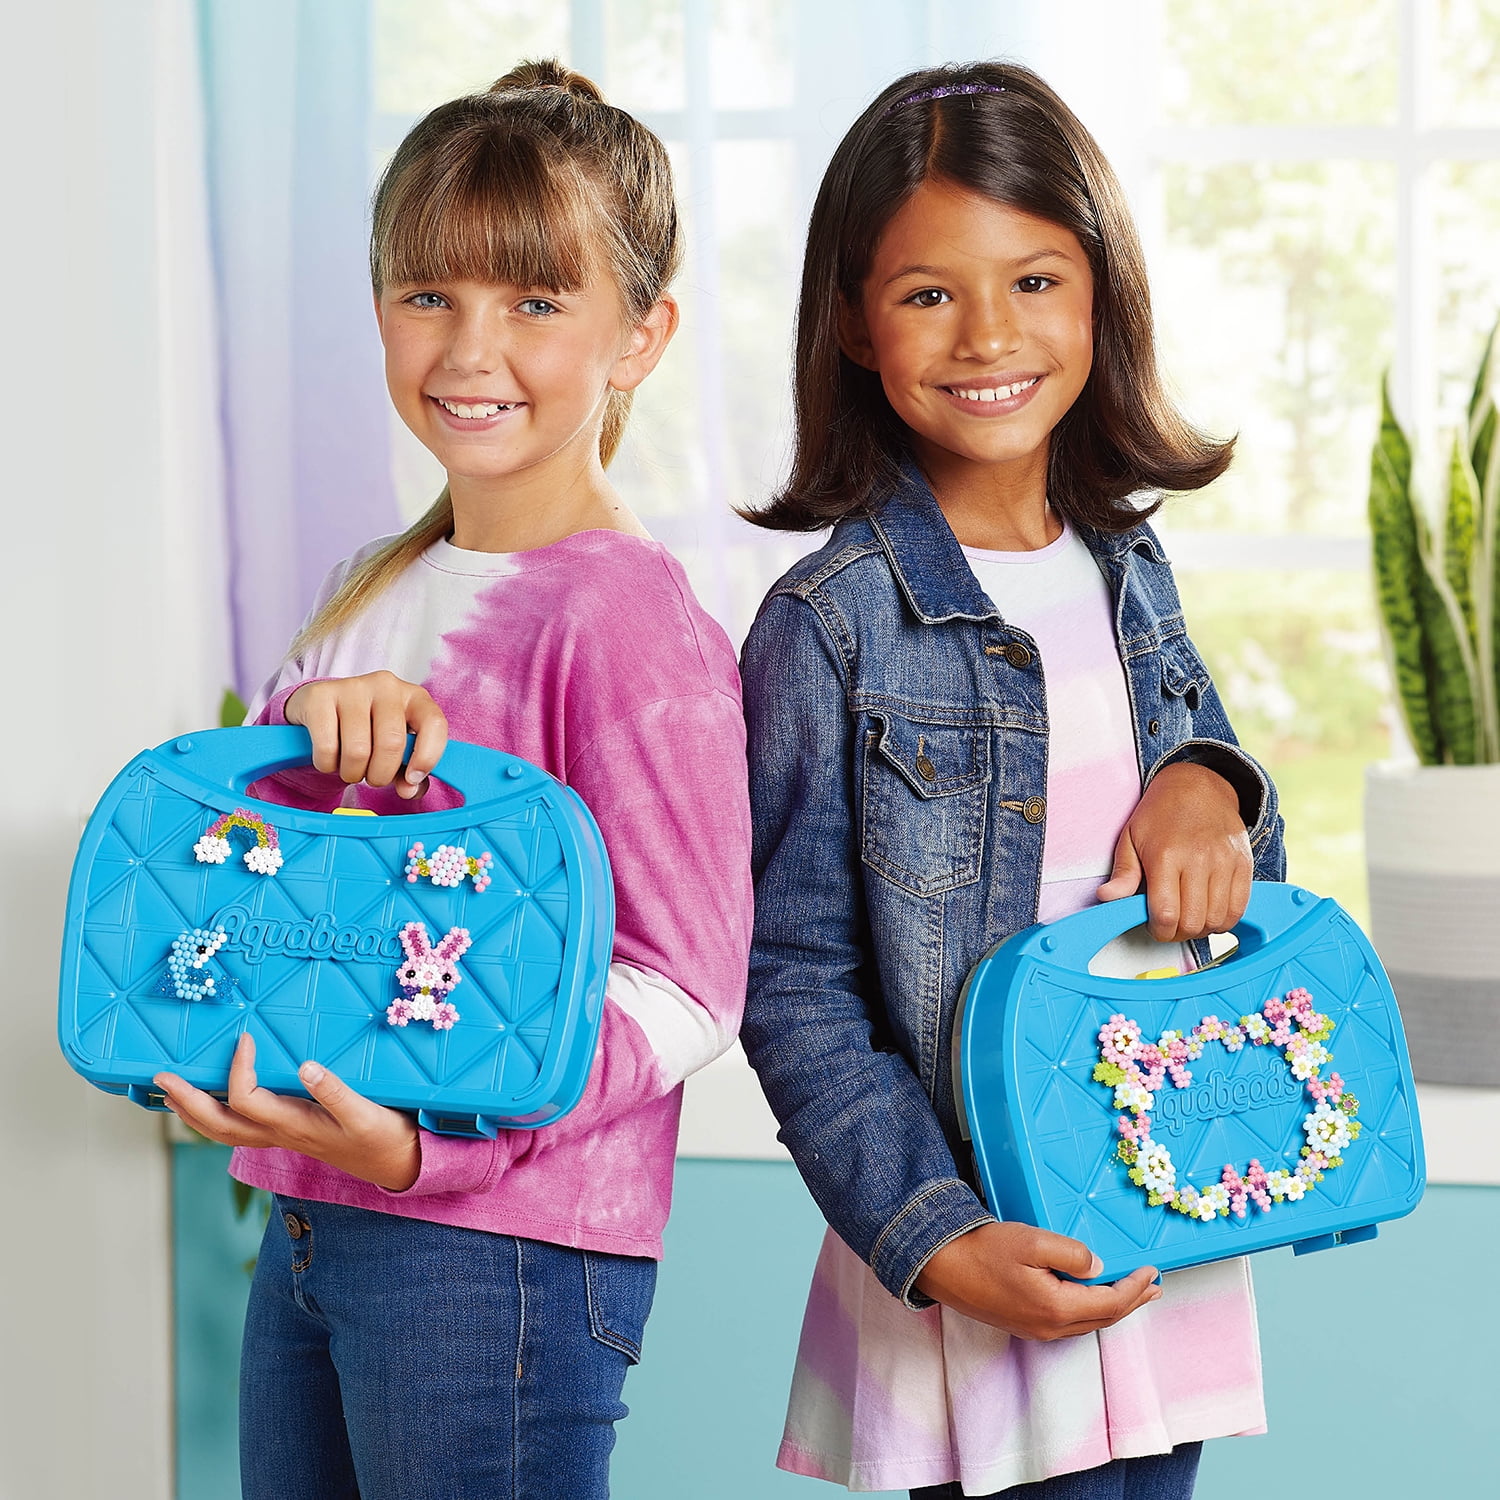 Lily's Little Learners: Getting Crafty with Aqua Beads